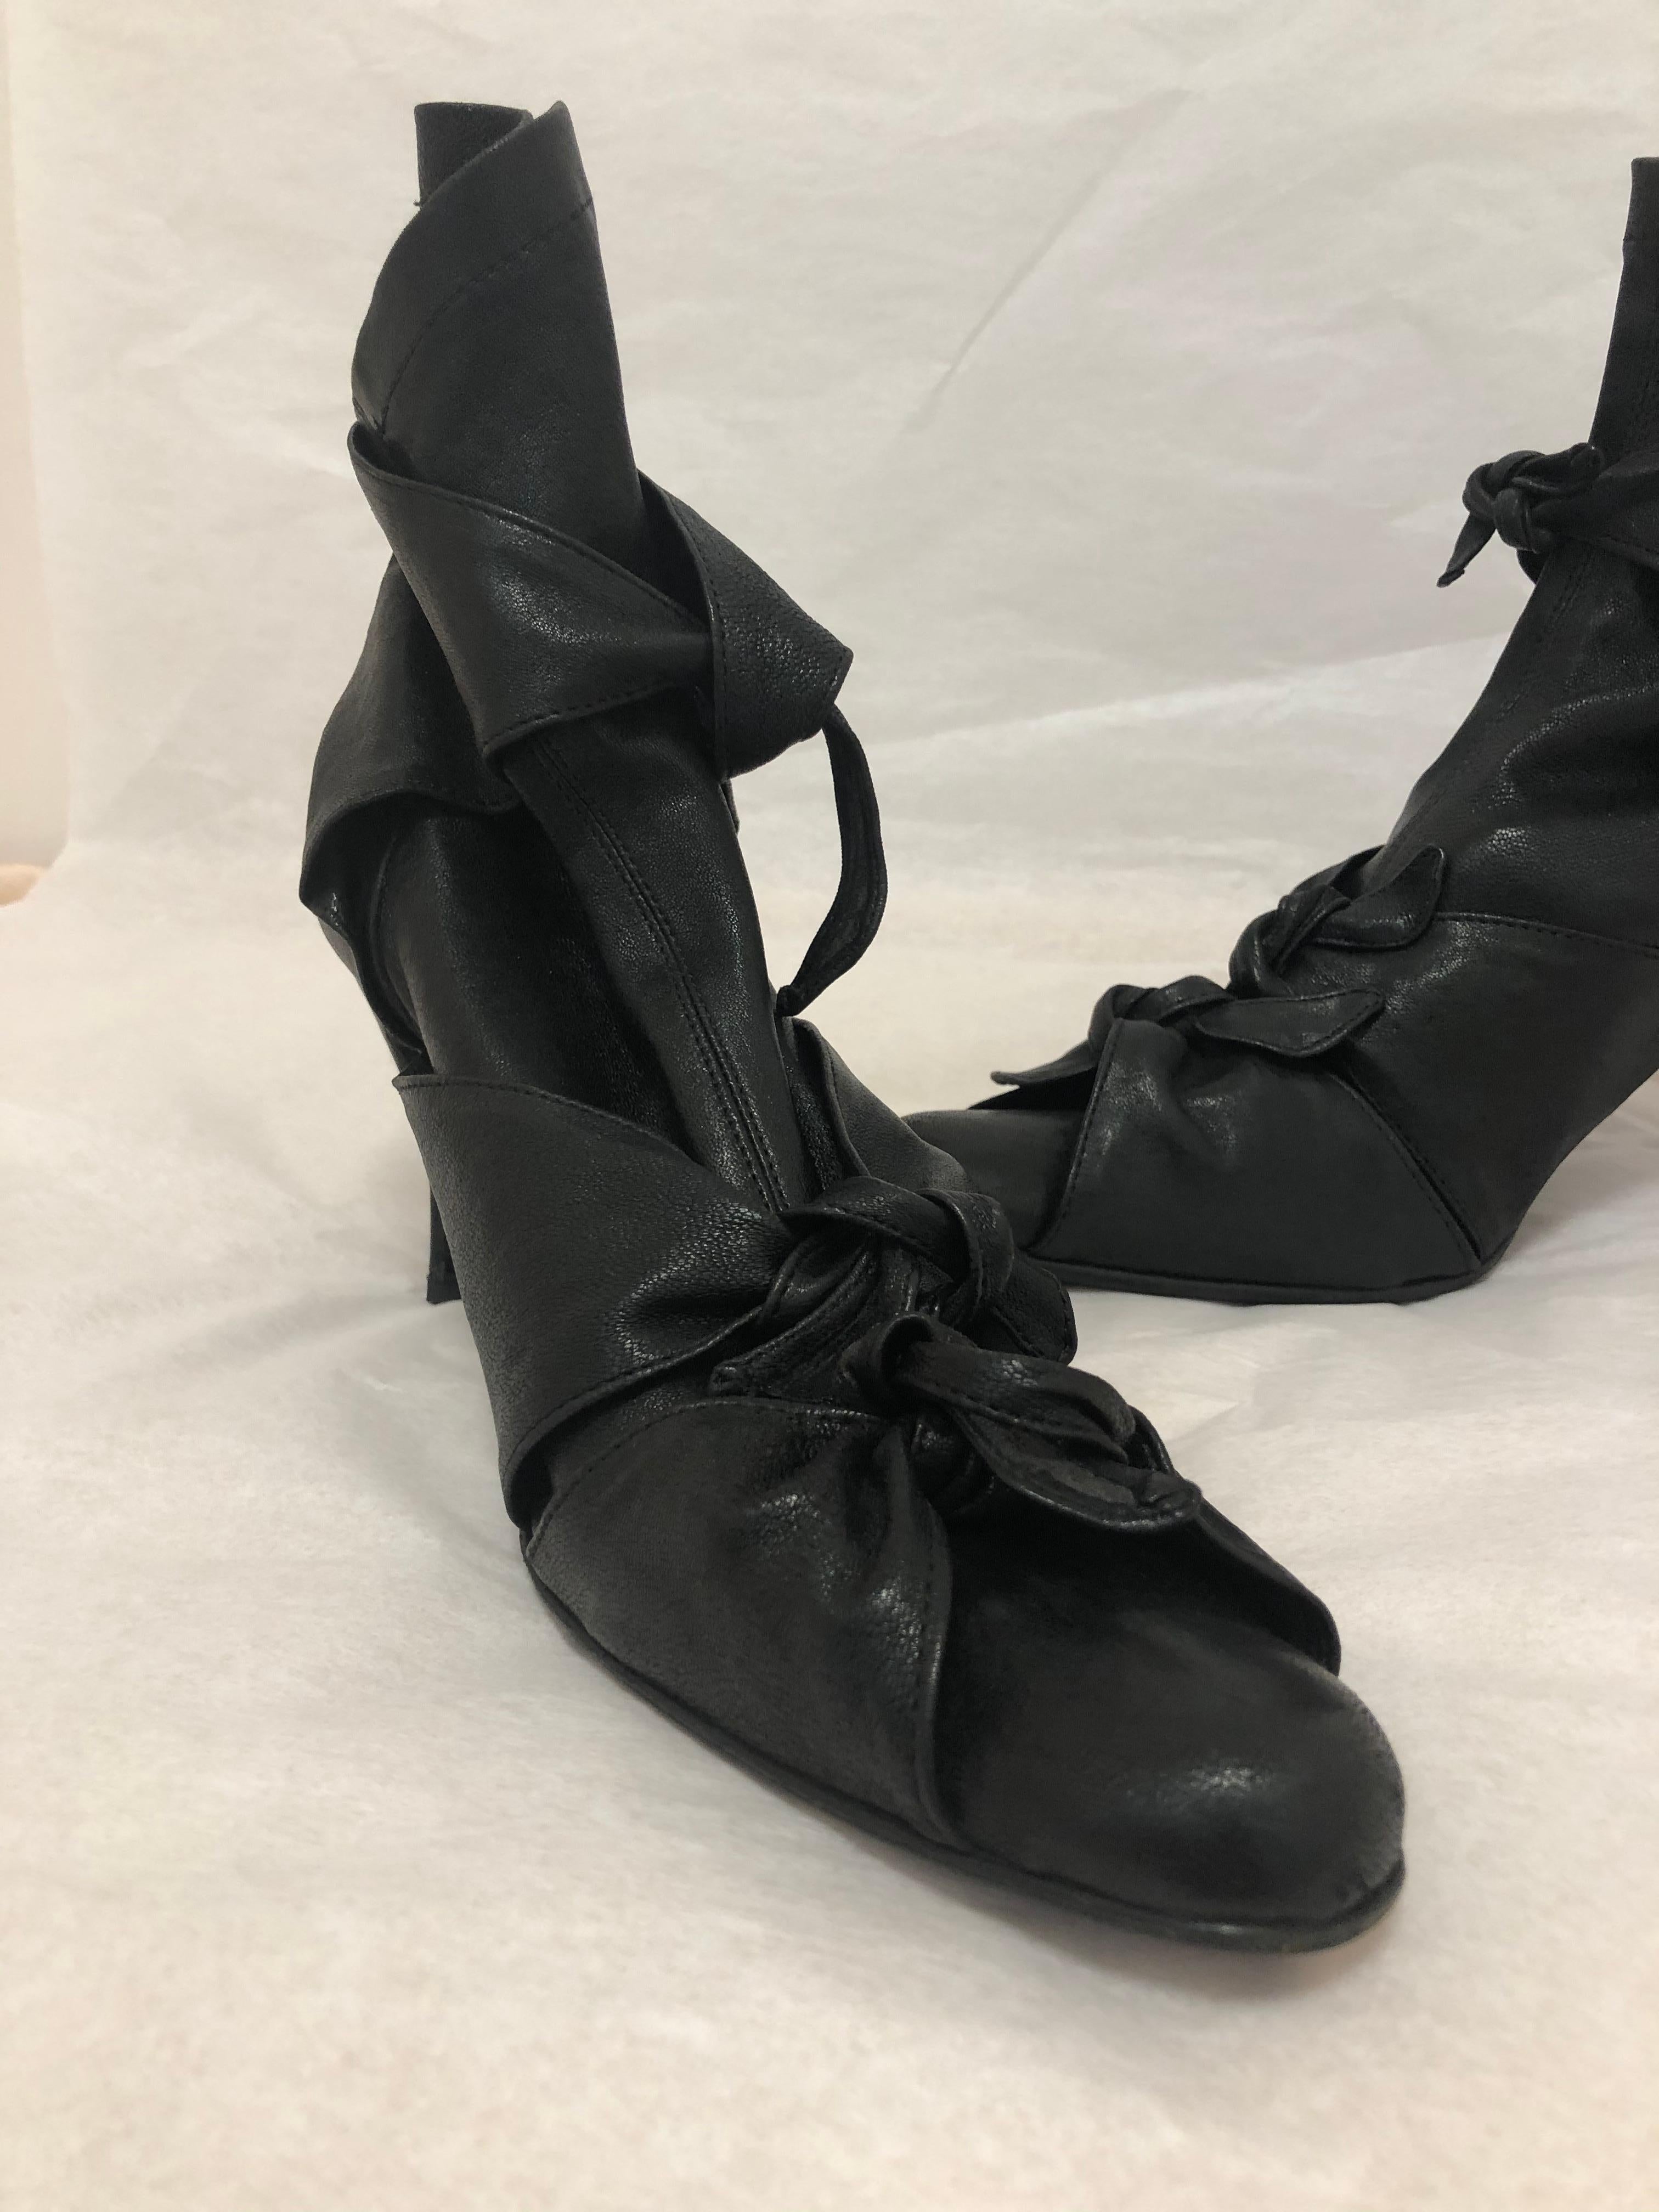 Romeo Gigli Black Leather Booties 36.5 In Excellent Condition For Sale In Port Hope, ON